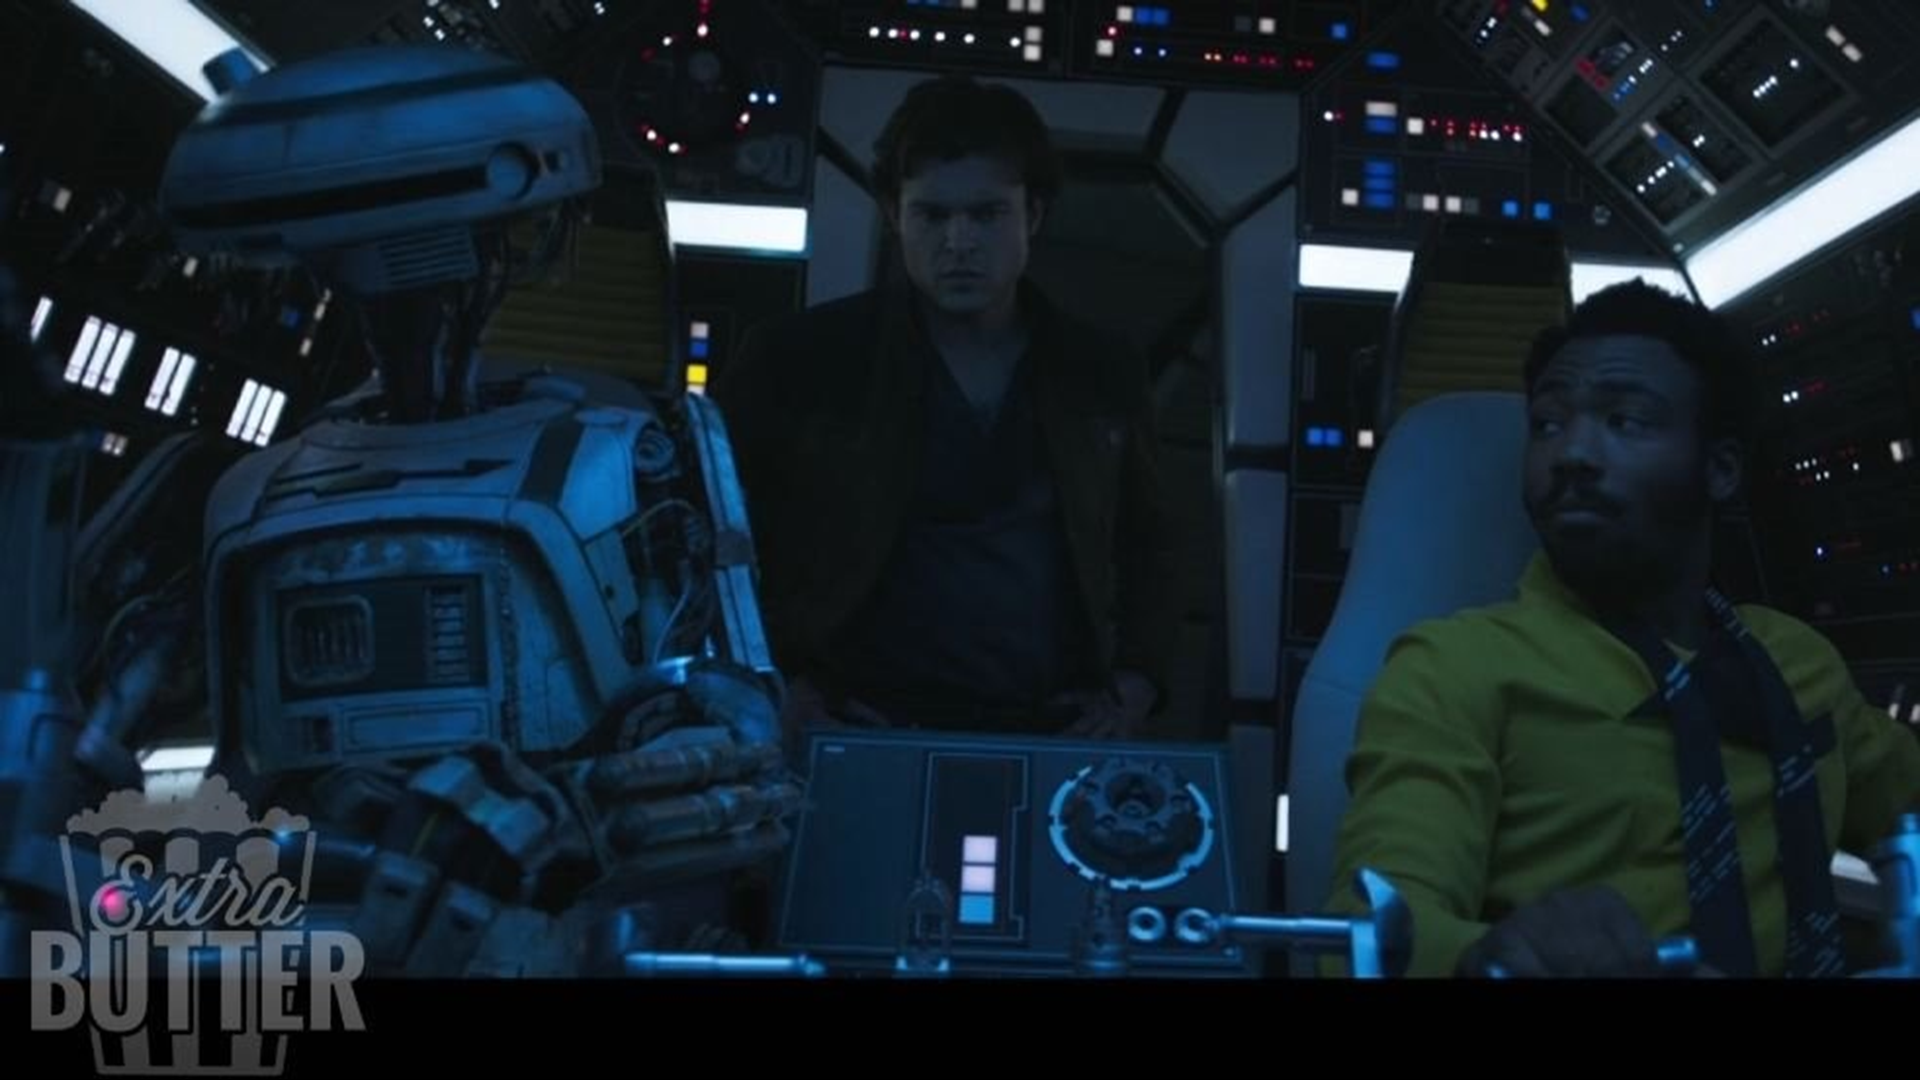 Star Wars fans have mixed feelings about the new cast on 'Solo: A Star Wars Story'.